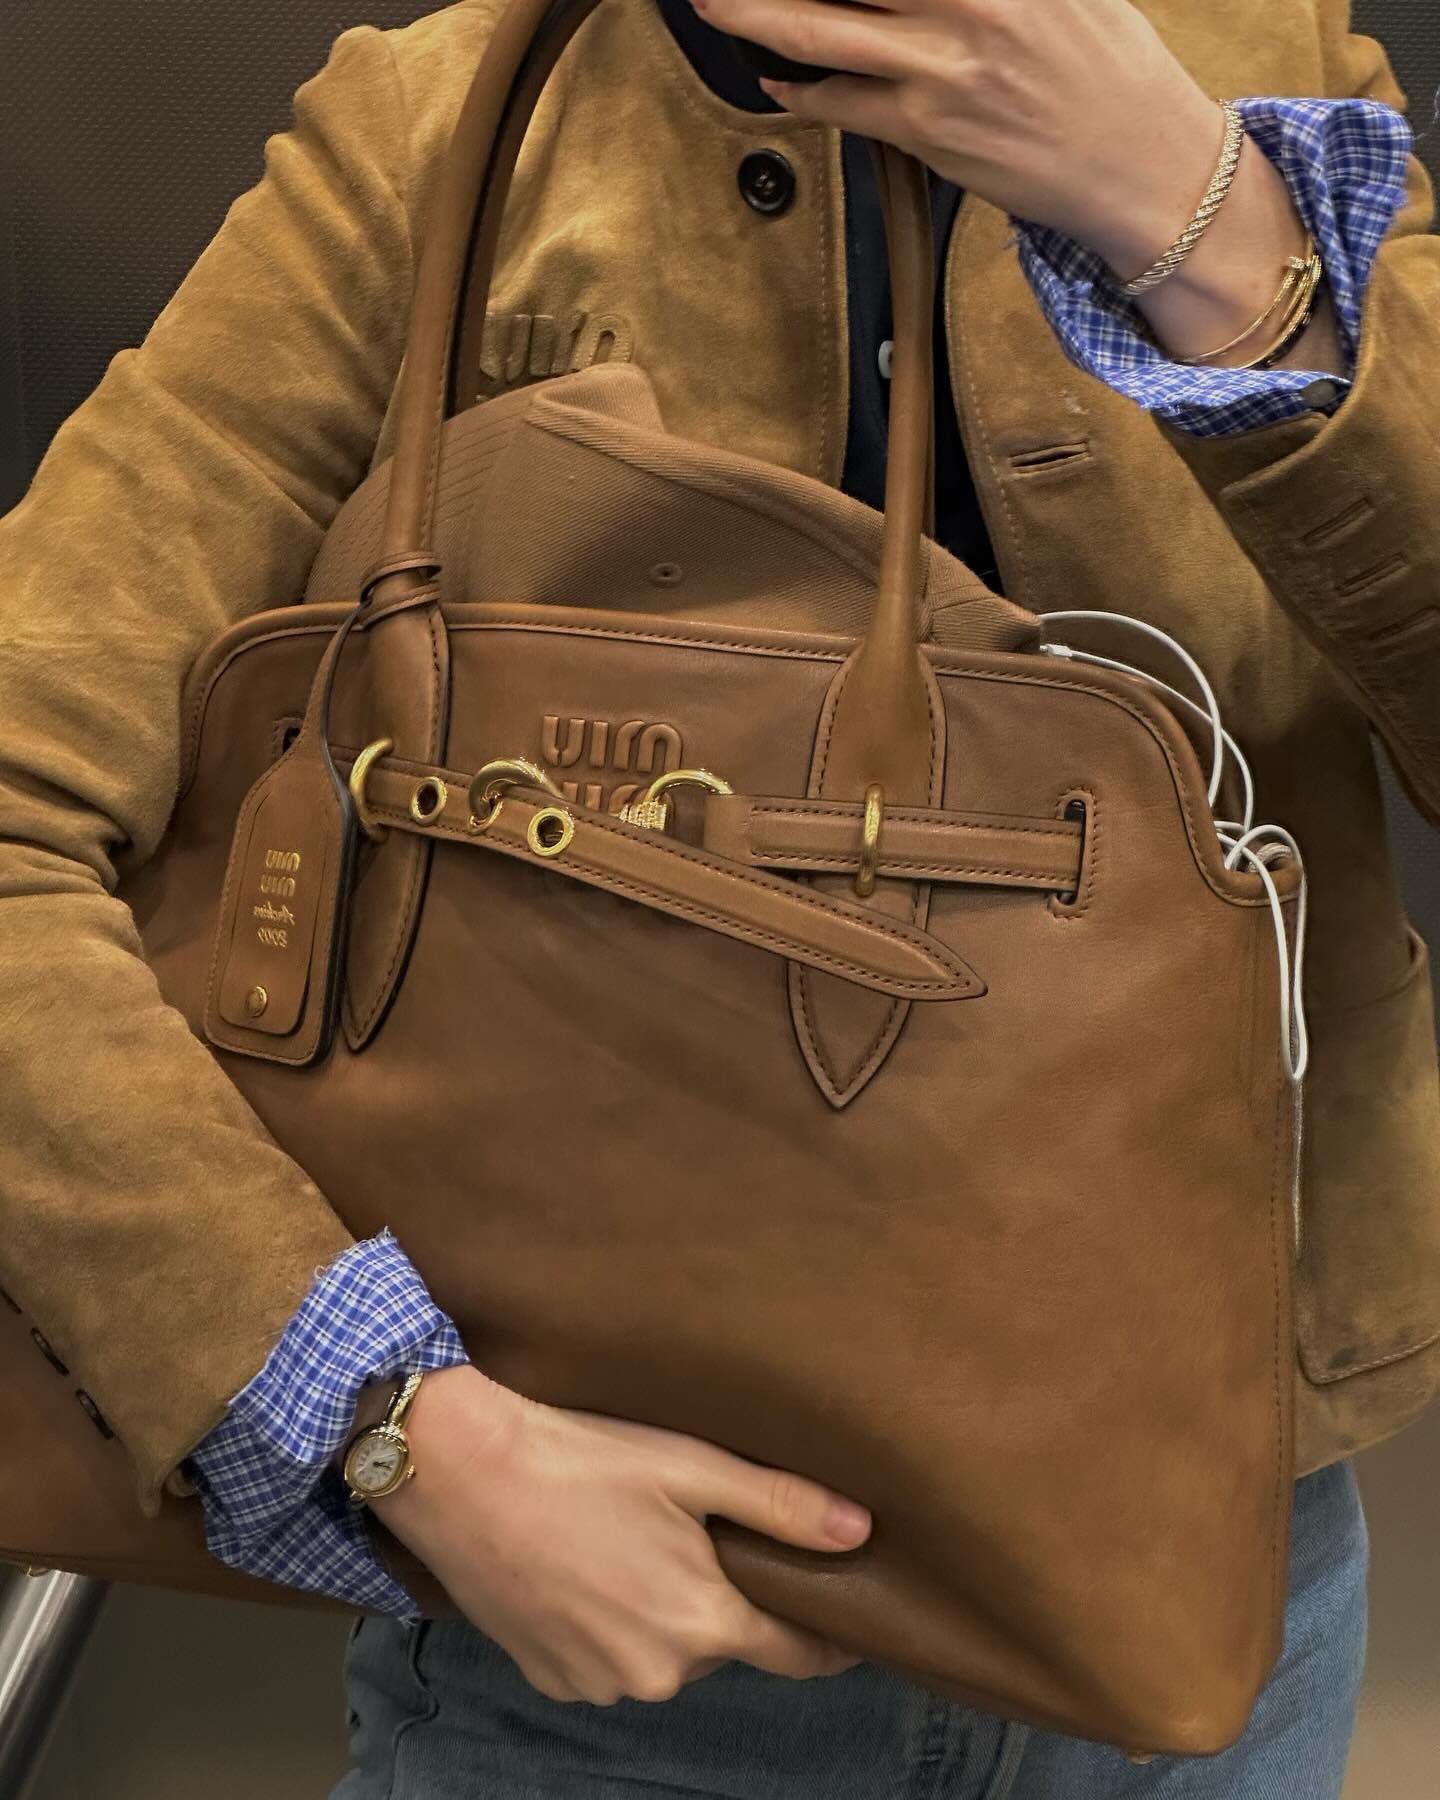 detail image of a woman holding a Miu Miu Aventure Bag in brown